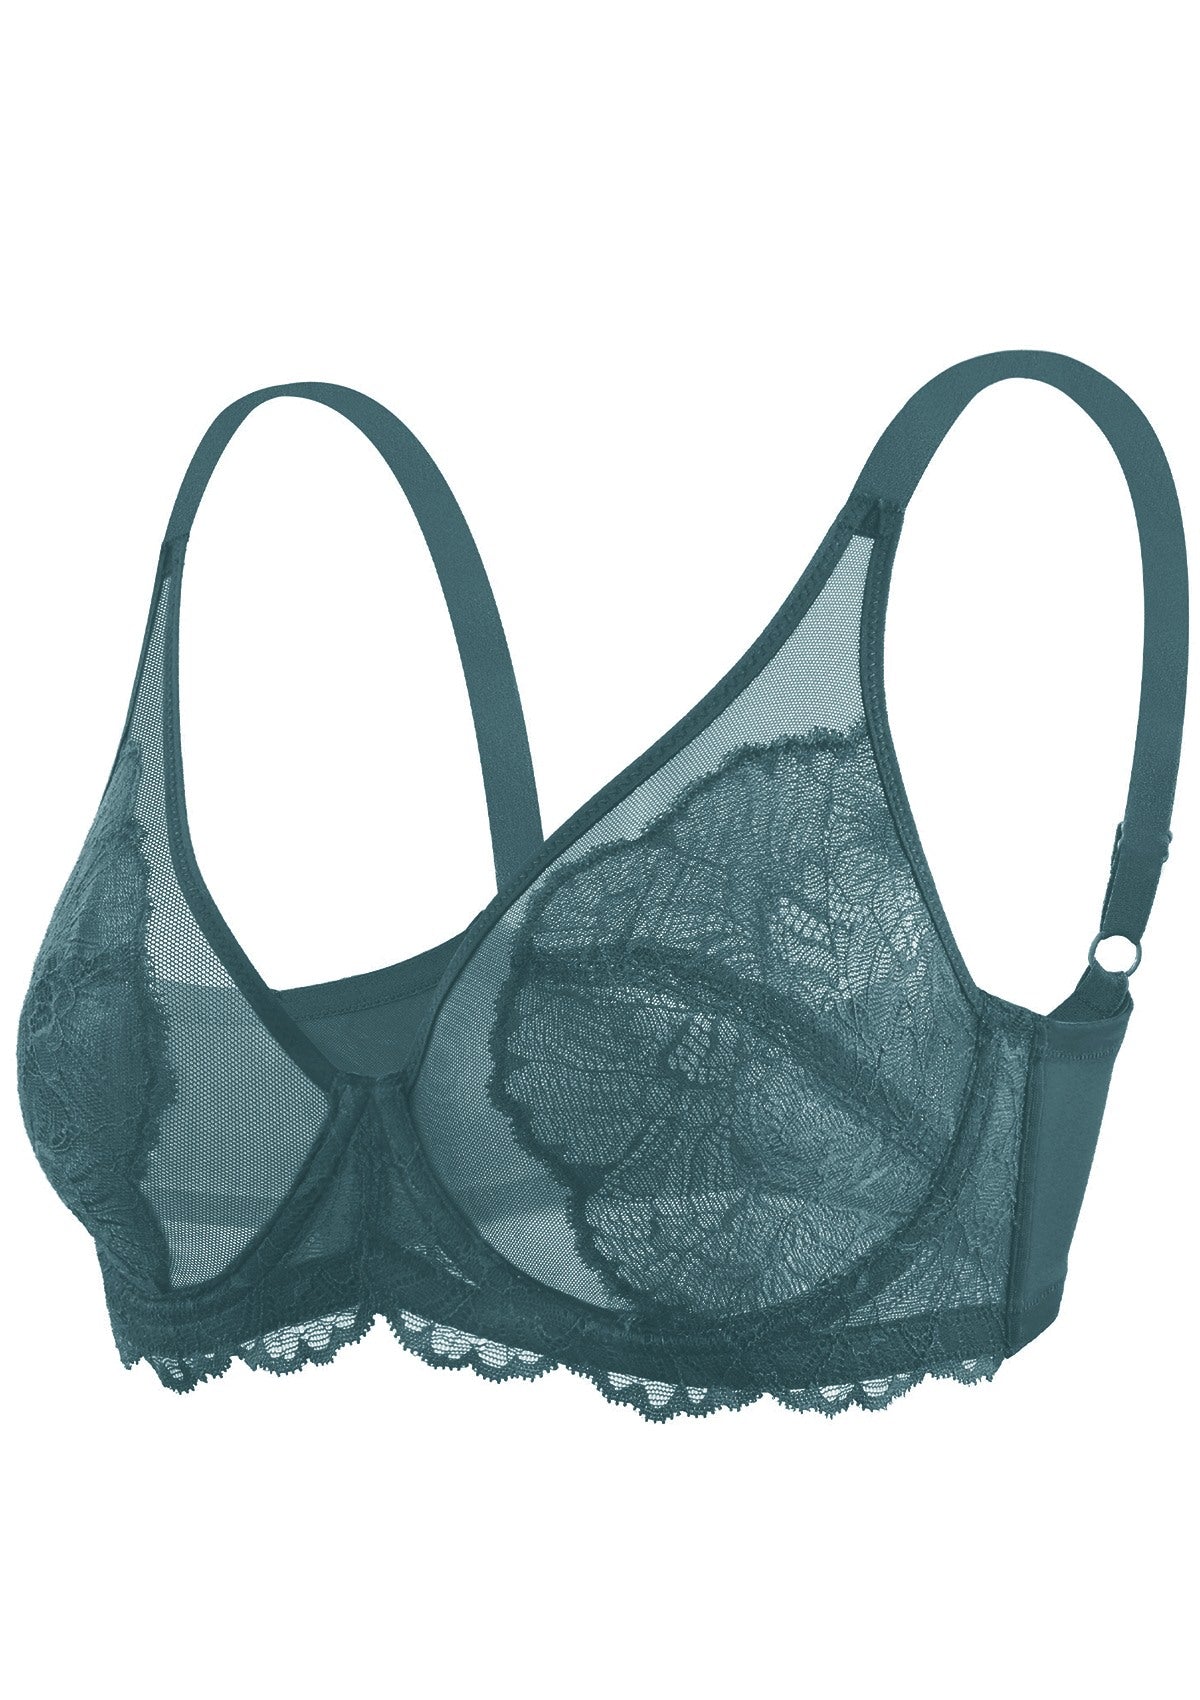 HSIA Blossom Full Figure See-Through Lace Bra For Side And Back Fat - Balsam Blue / 36 / DDD/F